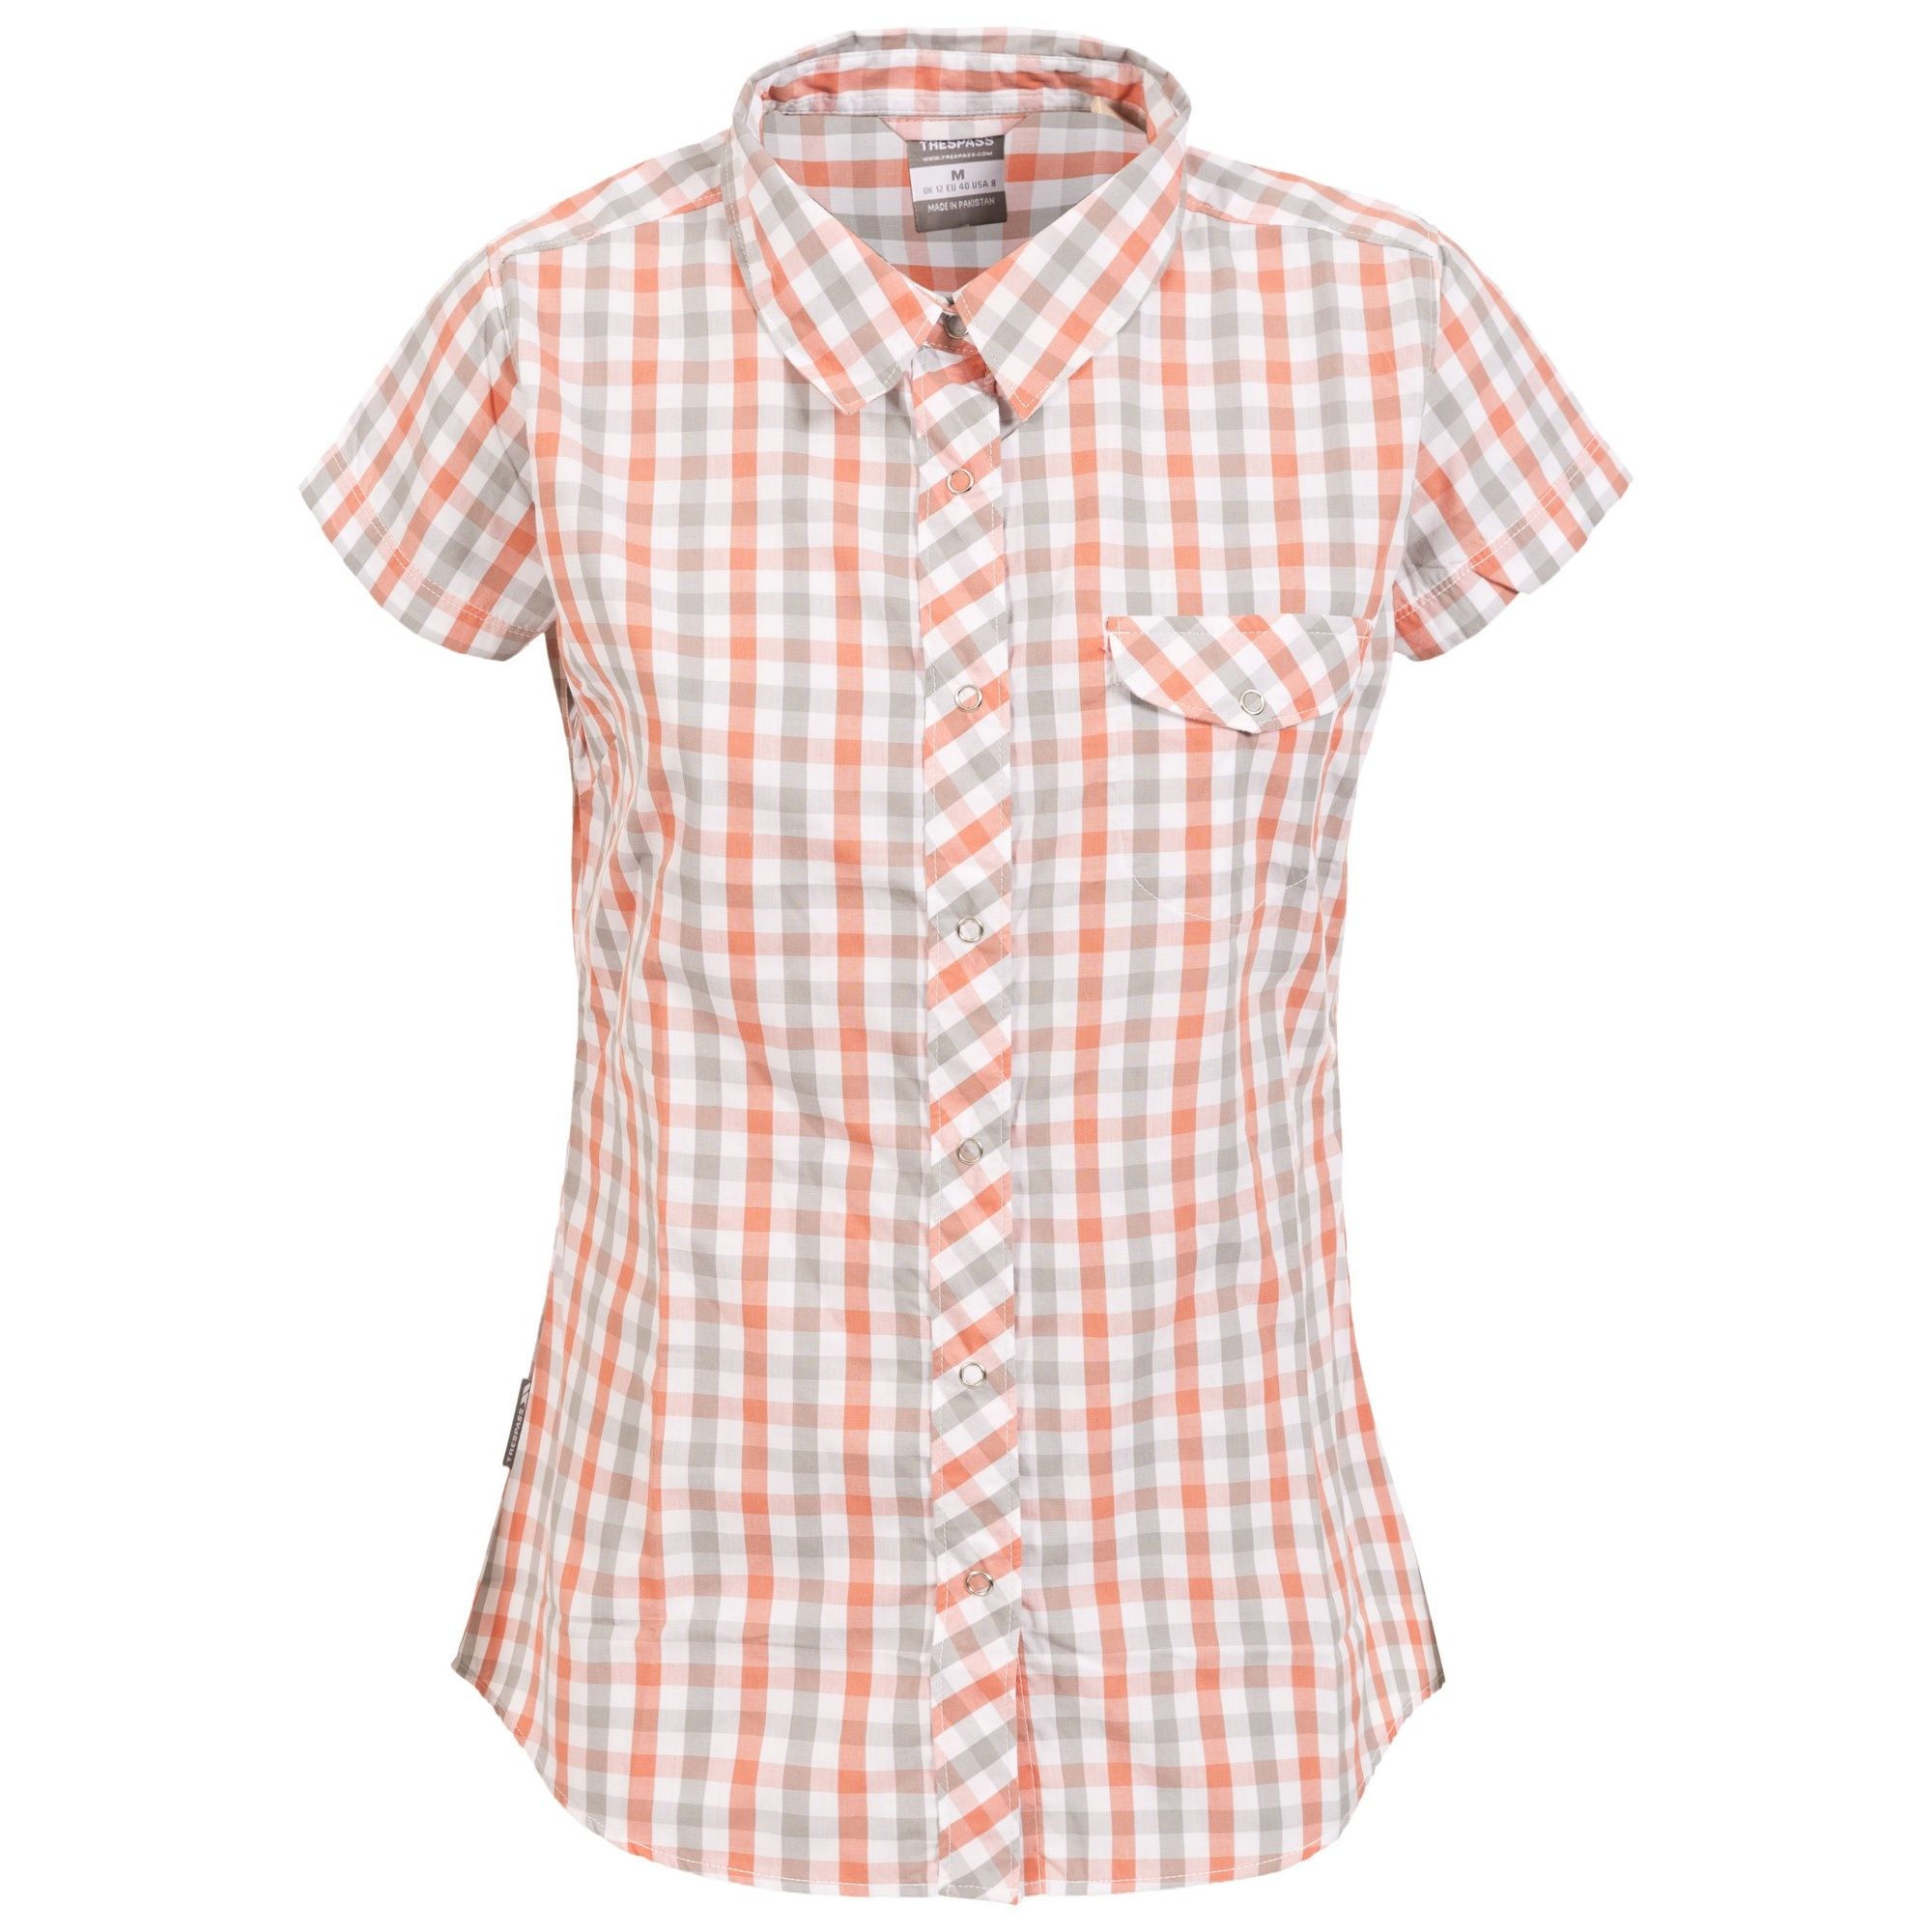 Yarn dyed check. Short sleeve. 2 piece collar. Chest pocket. Ring stud fastening. 65% Cotton, 35% Polyester. Trespass Womens Chest Sizing (approx): XS/8 - 32in/81cm, S/10 - 34in/86cm, M/12 - 36in/91.4cm, L/14 - 38in/96.5cm, XL/16 - 40in/101.5cm, XXL/18 - 42in/106.5cm.